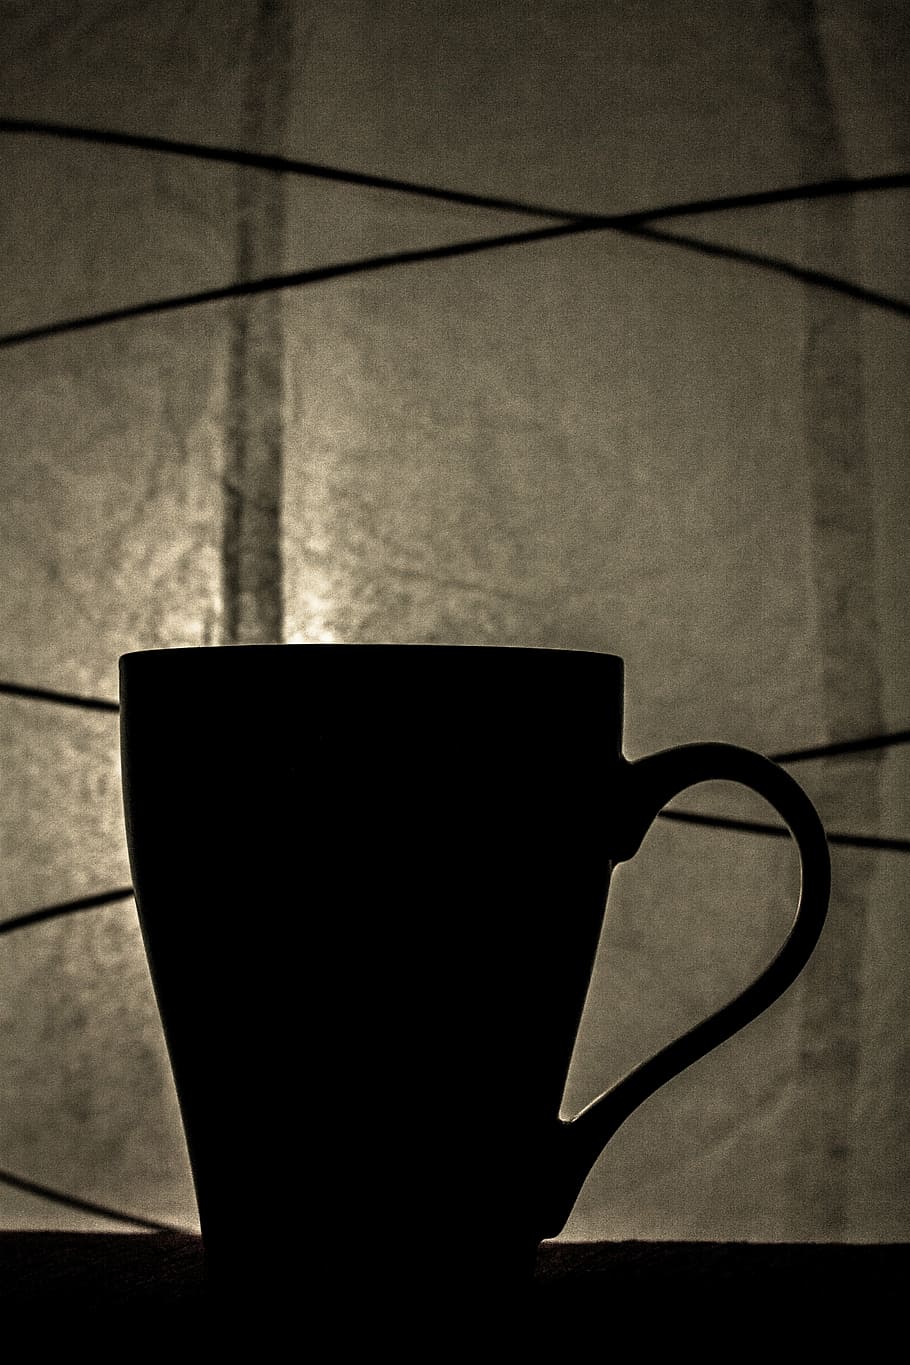 mug, cup, dishware, home, living, drink, beverage, silhouette, still life, coffee cup